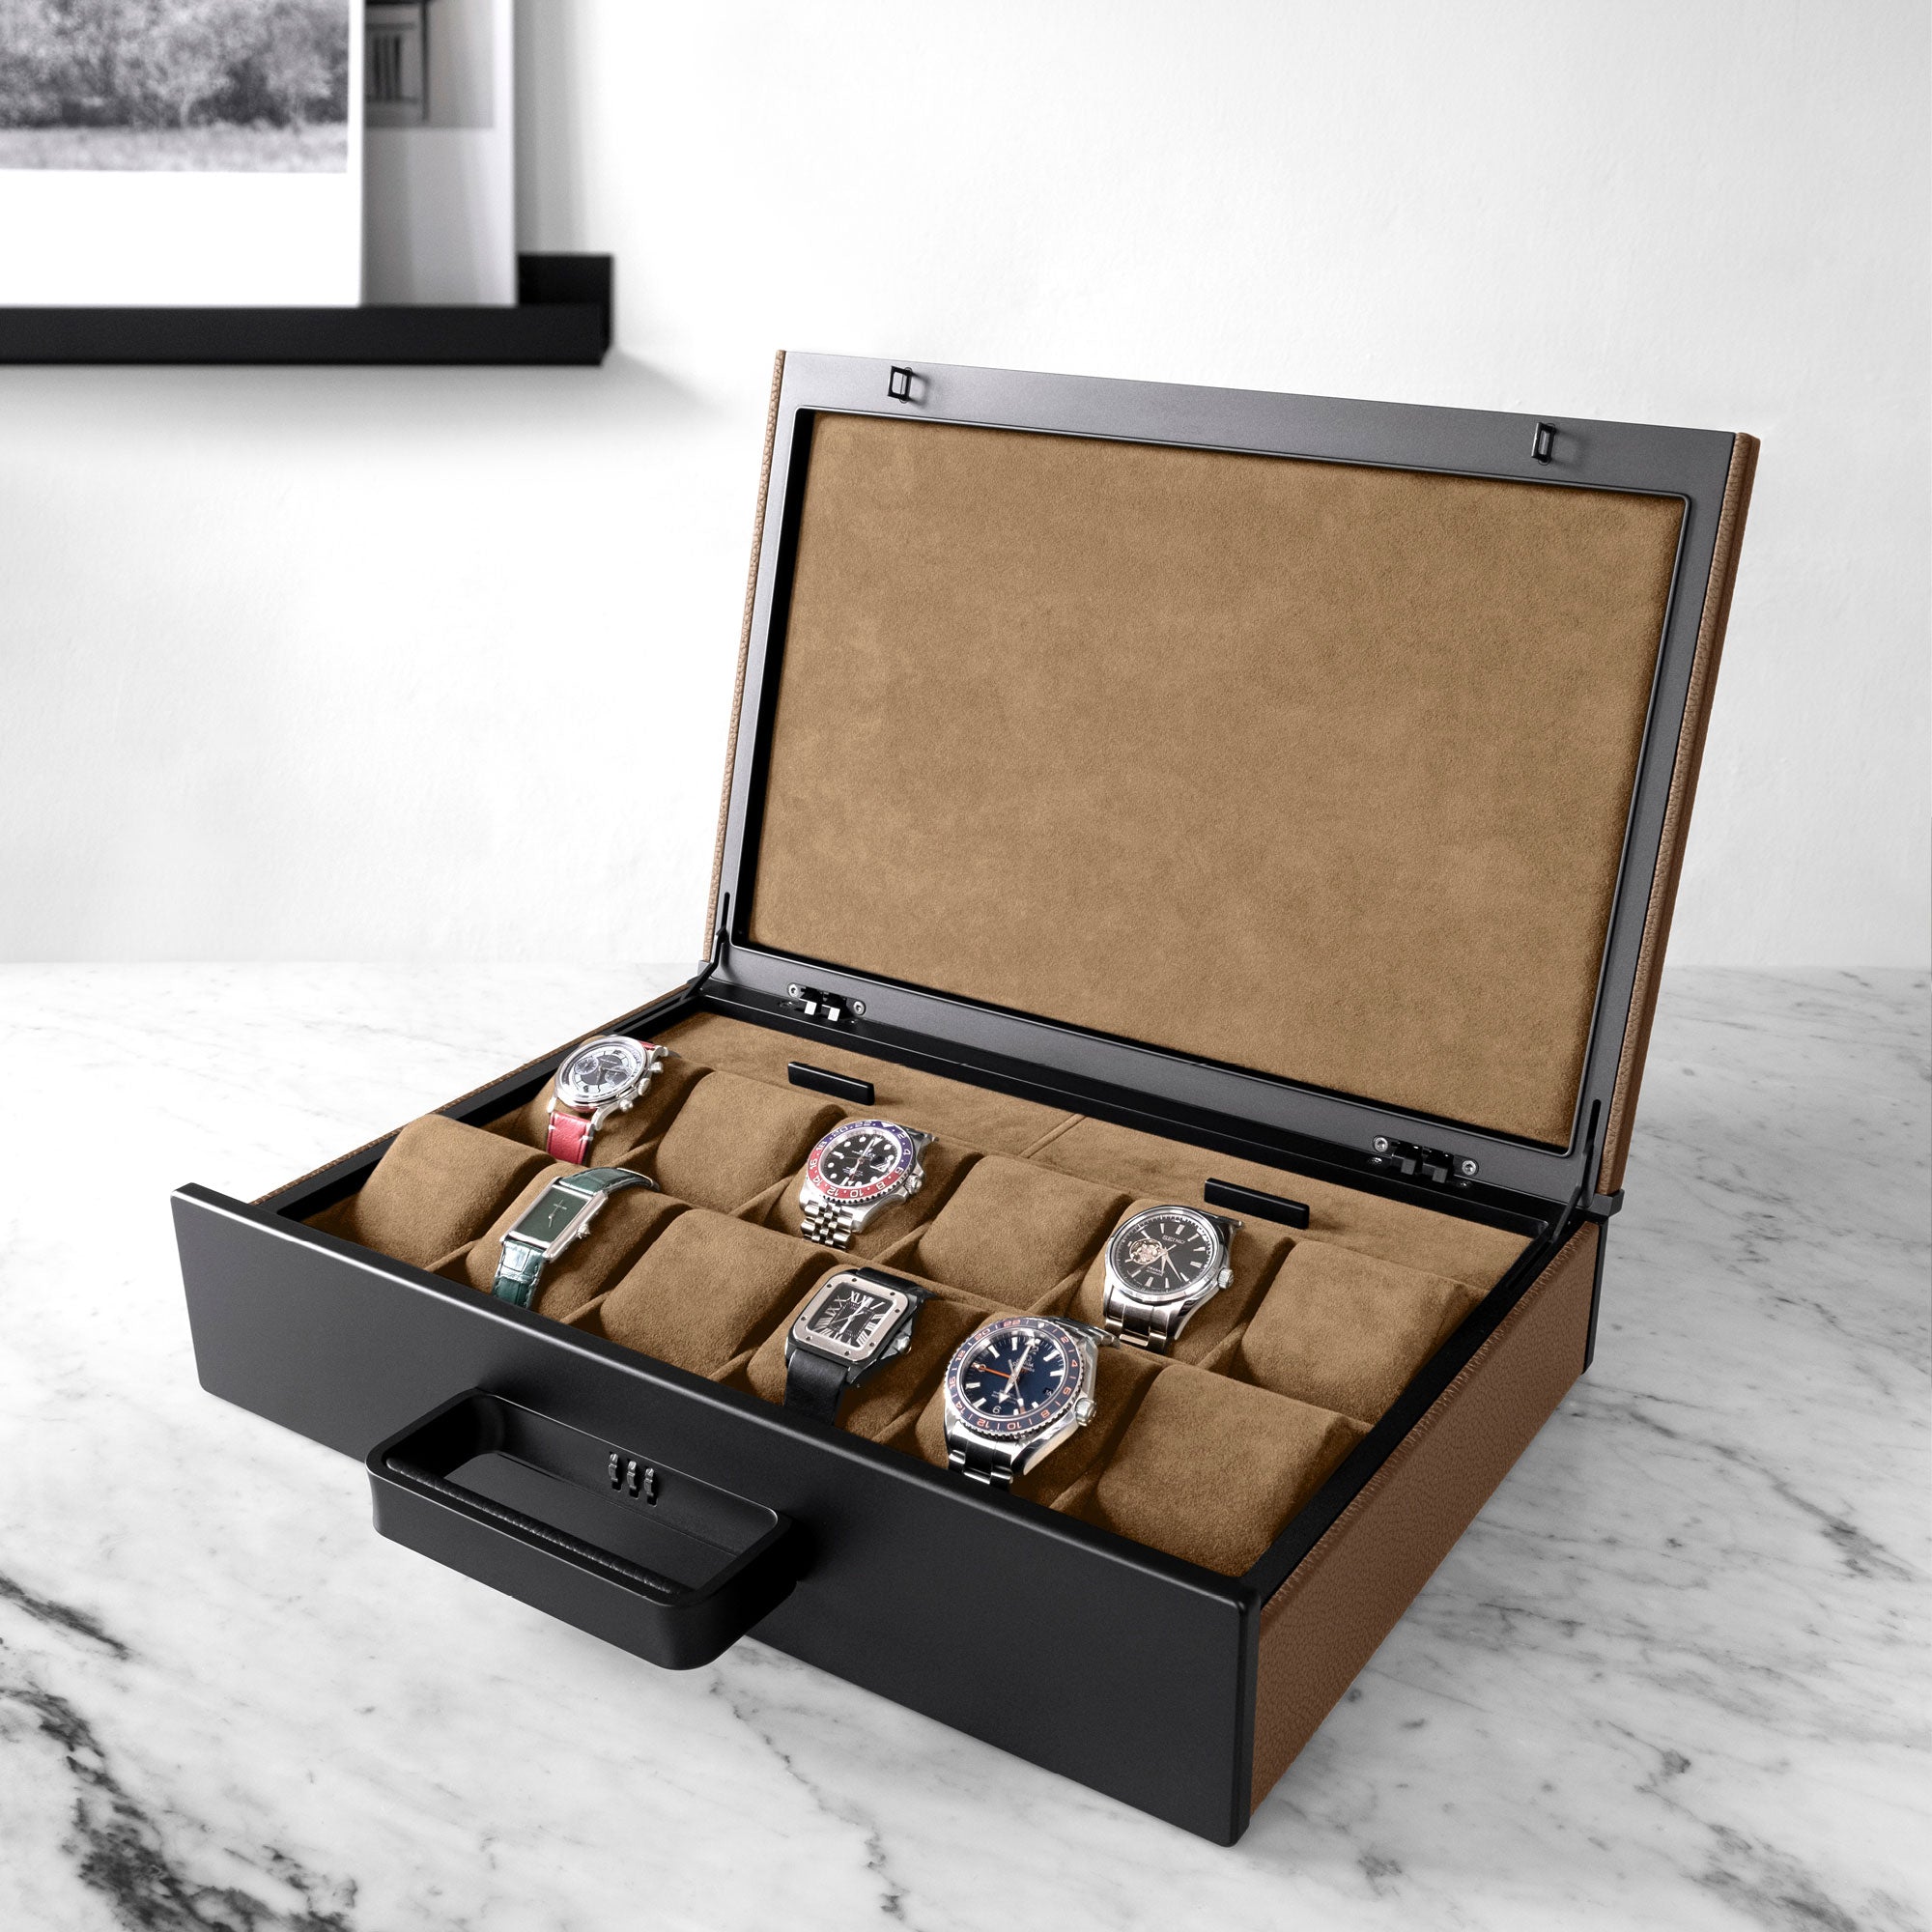 Designer Watch briefcase for your watch collection in camel leather, black carbon fiber and anodized aluminum and camel Alcantara interior